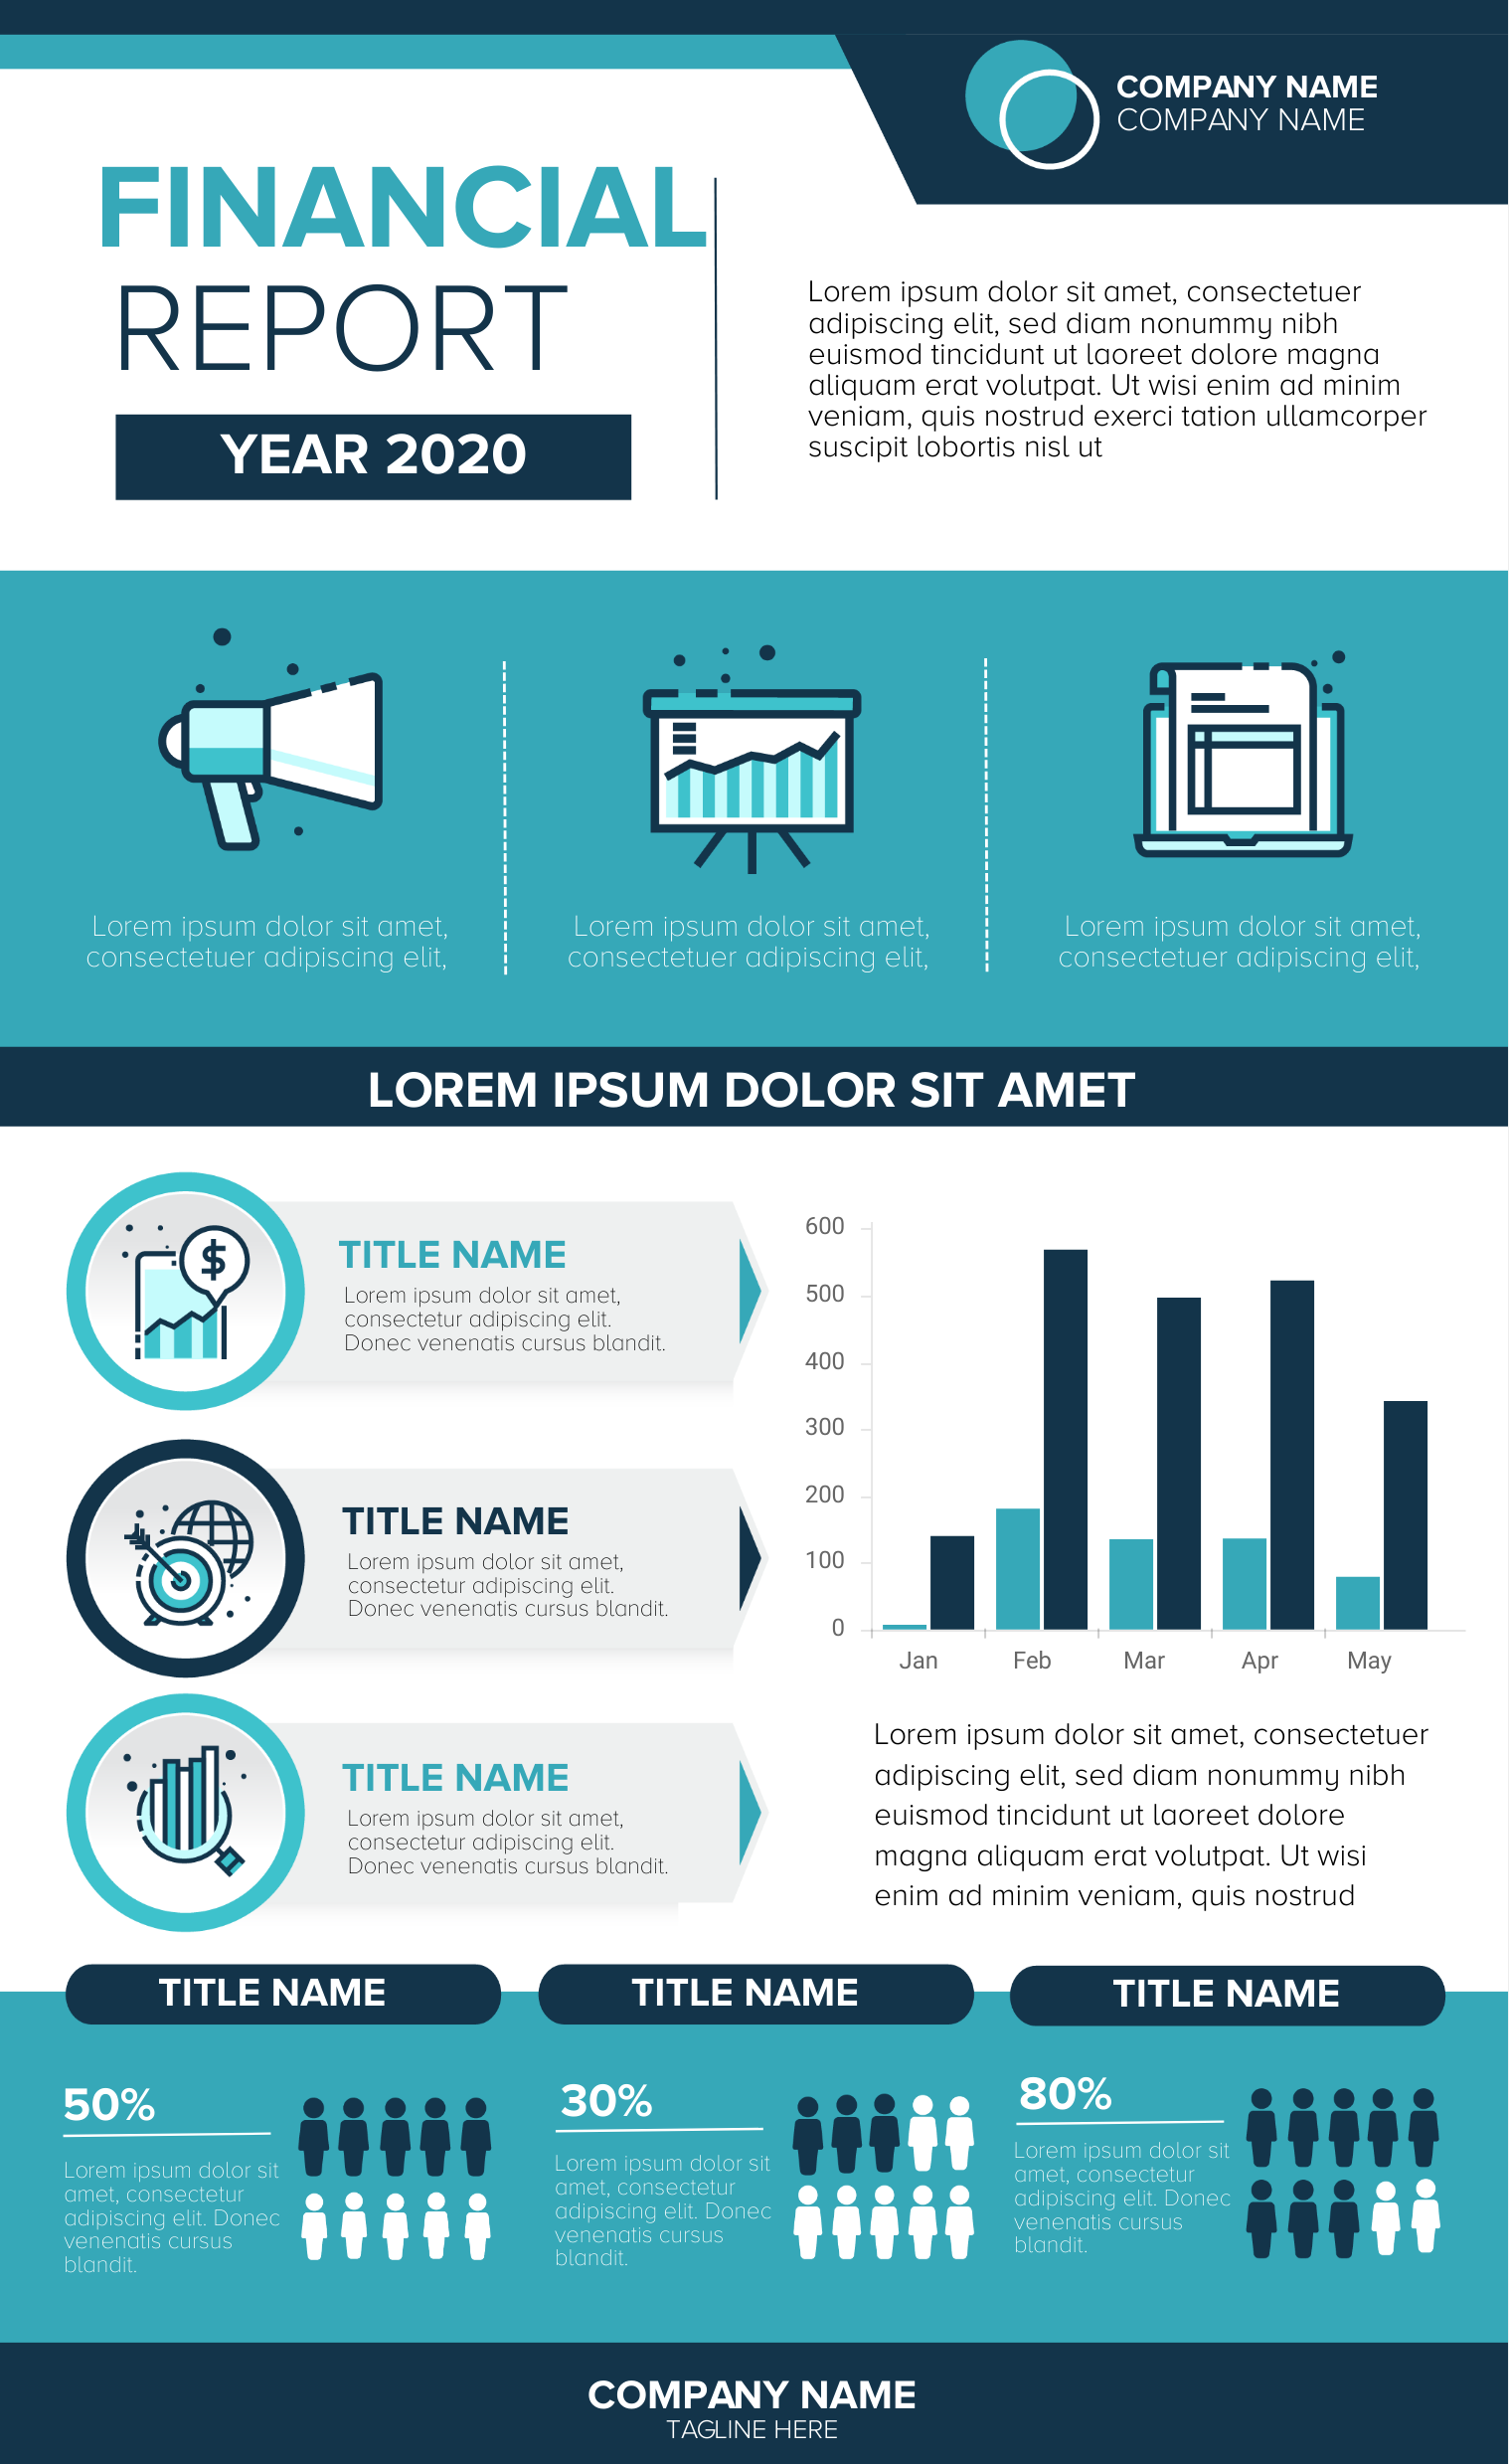 Customizable Financial Infographic Templates And Examples